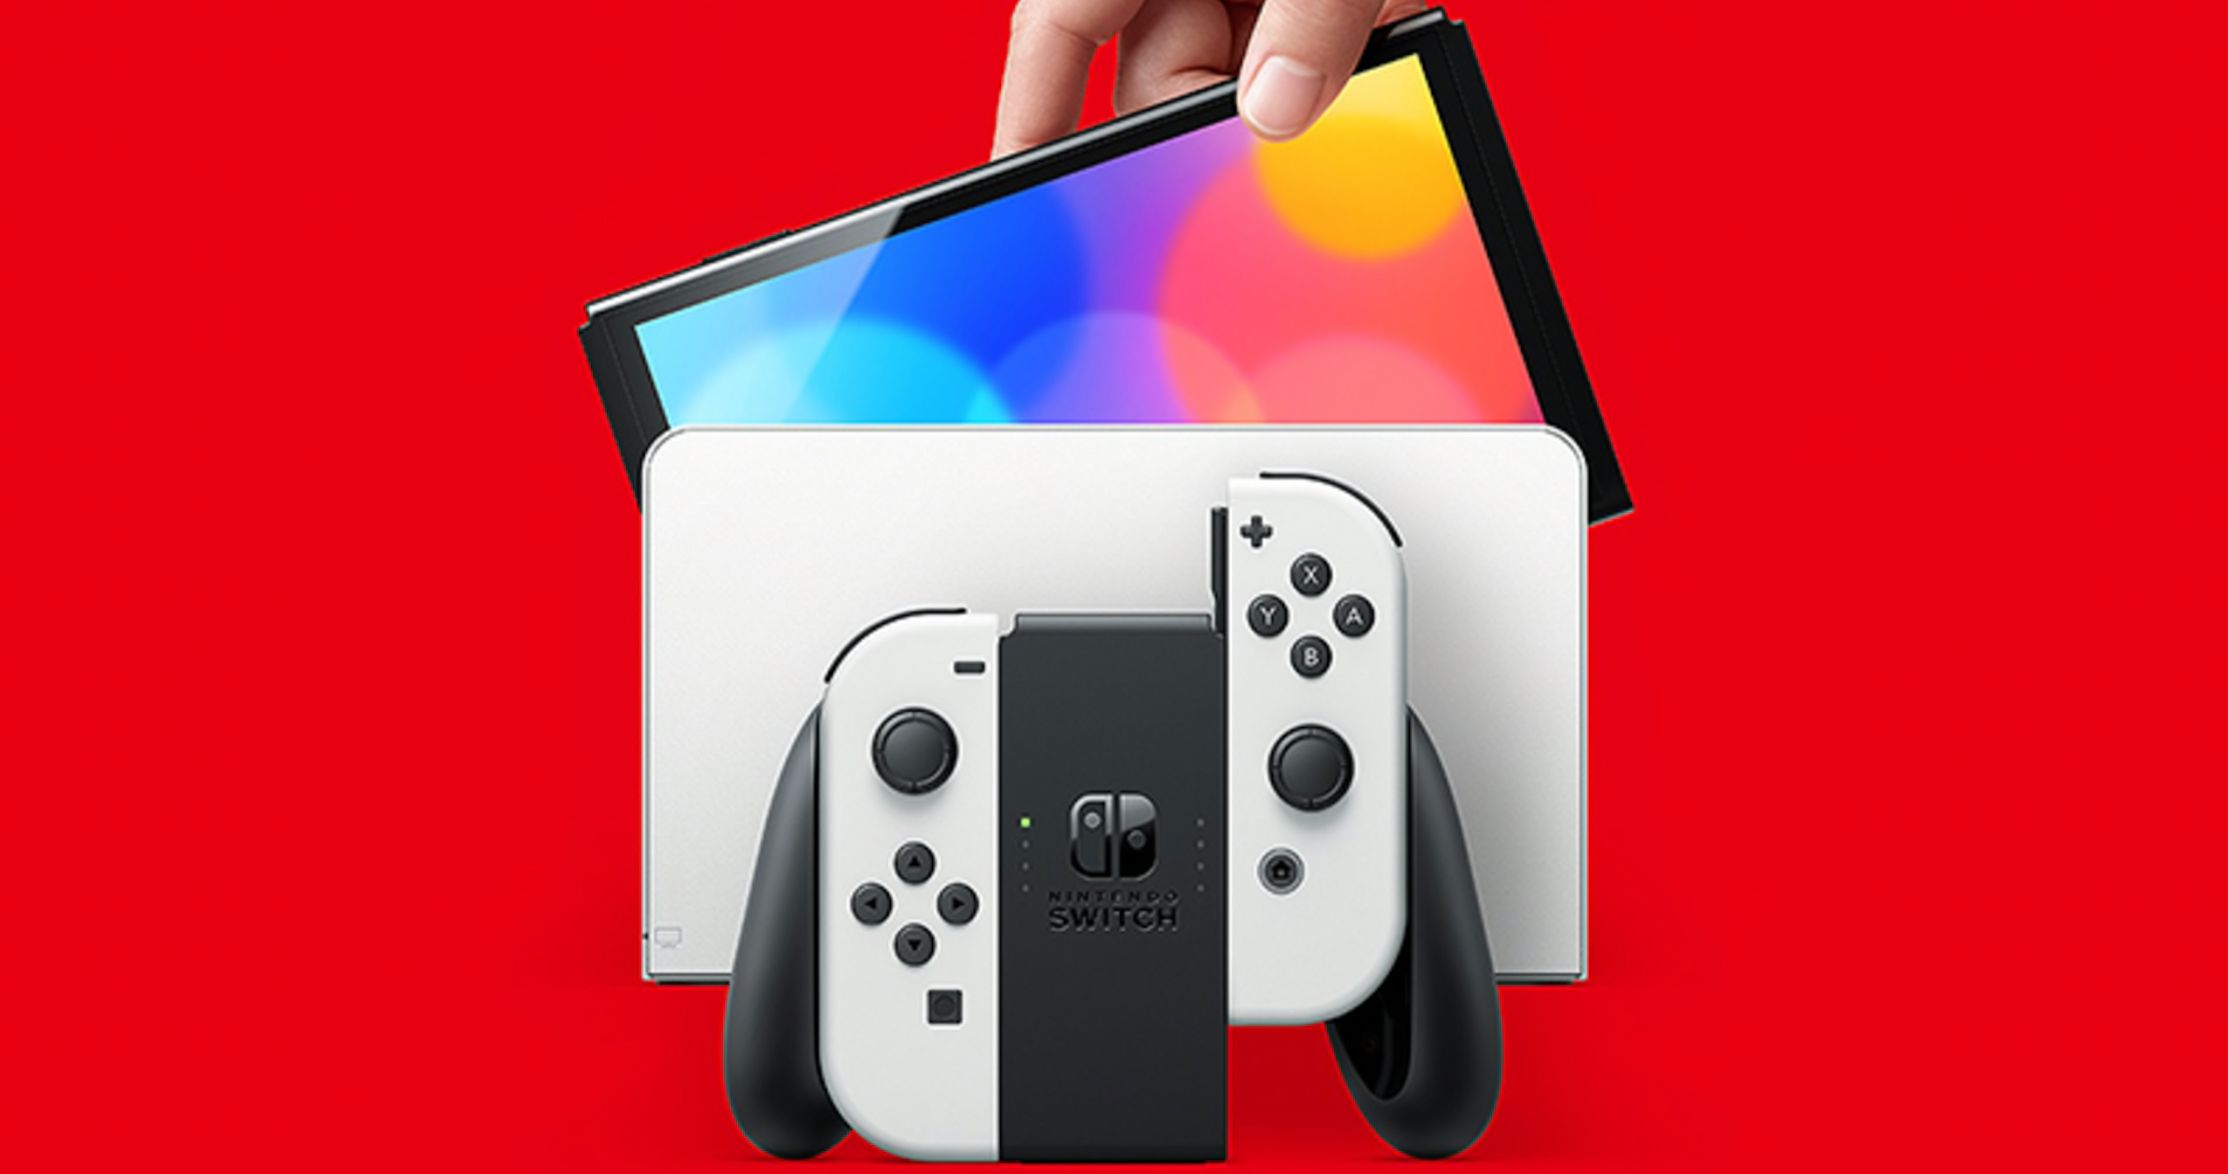 Nintendo Switch OLED Model Is Coming This Fall, Here's a First Look